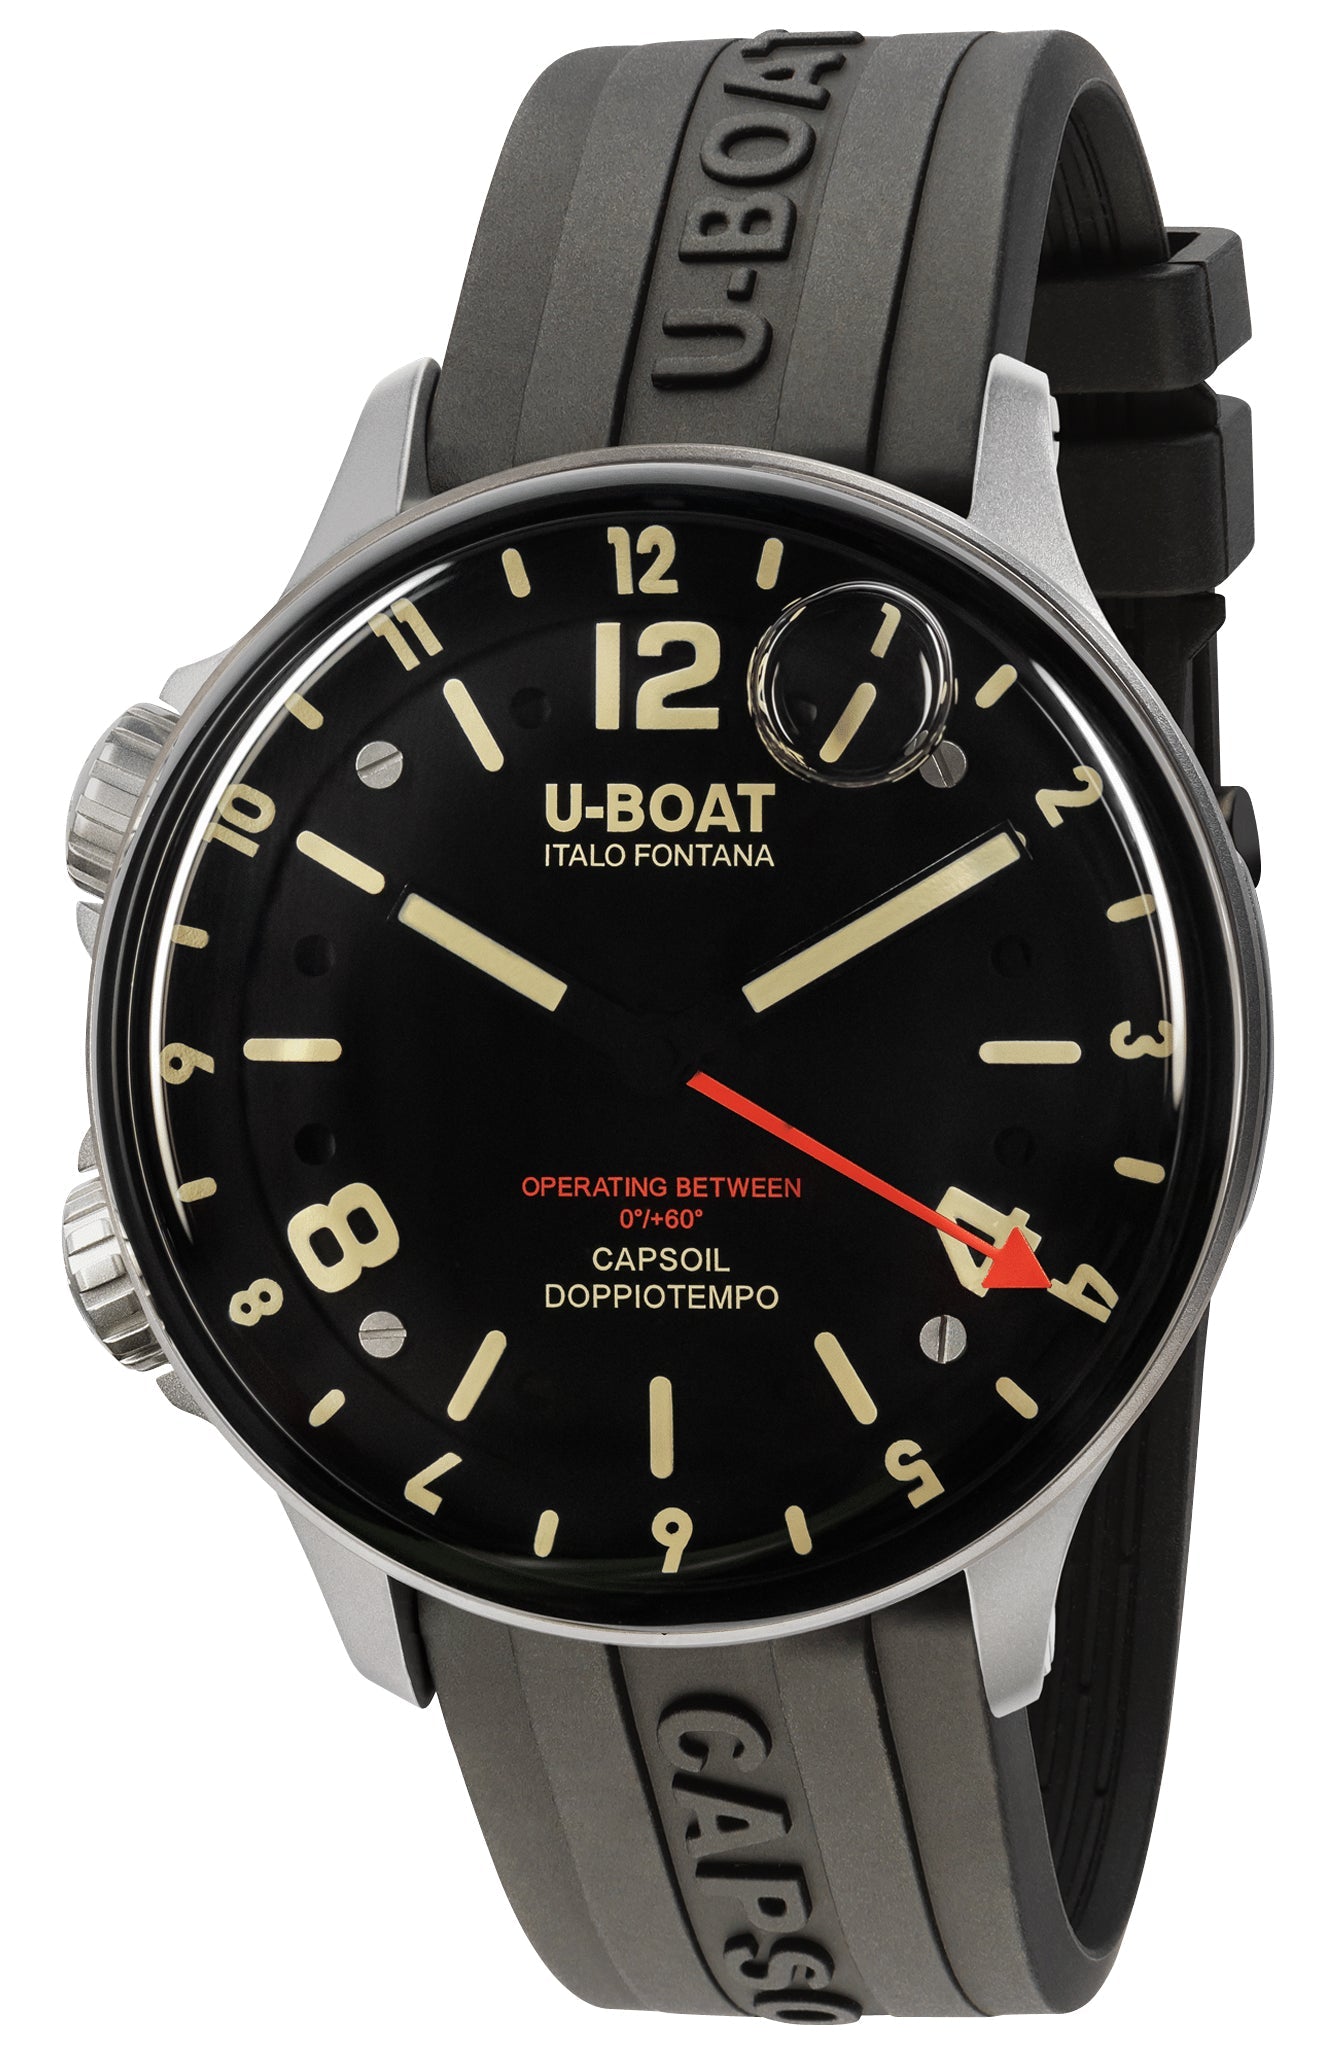 update alt-text with template Watches - Mens-U-Boat-8769-12-hour display, 40 - 45 mm, 45 - 50 mm, bi-directional rotating bezel, black, Capsoil Doppiotempo, dual time zone, mens, menswatches, new arrivals, round, rpSKU_8770, rpSKU_8839, rpSKU_8840, rpSKU_8841, rpSKU_8888, rubber, stainless steel case, swiss automatic, swiss quartz, U-Boat, watches-Watches & Beyond